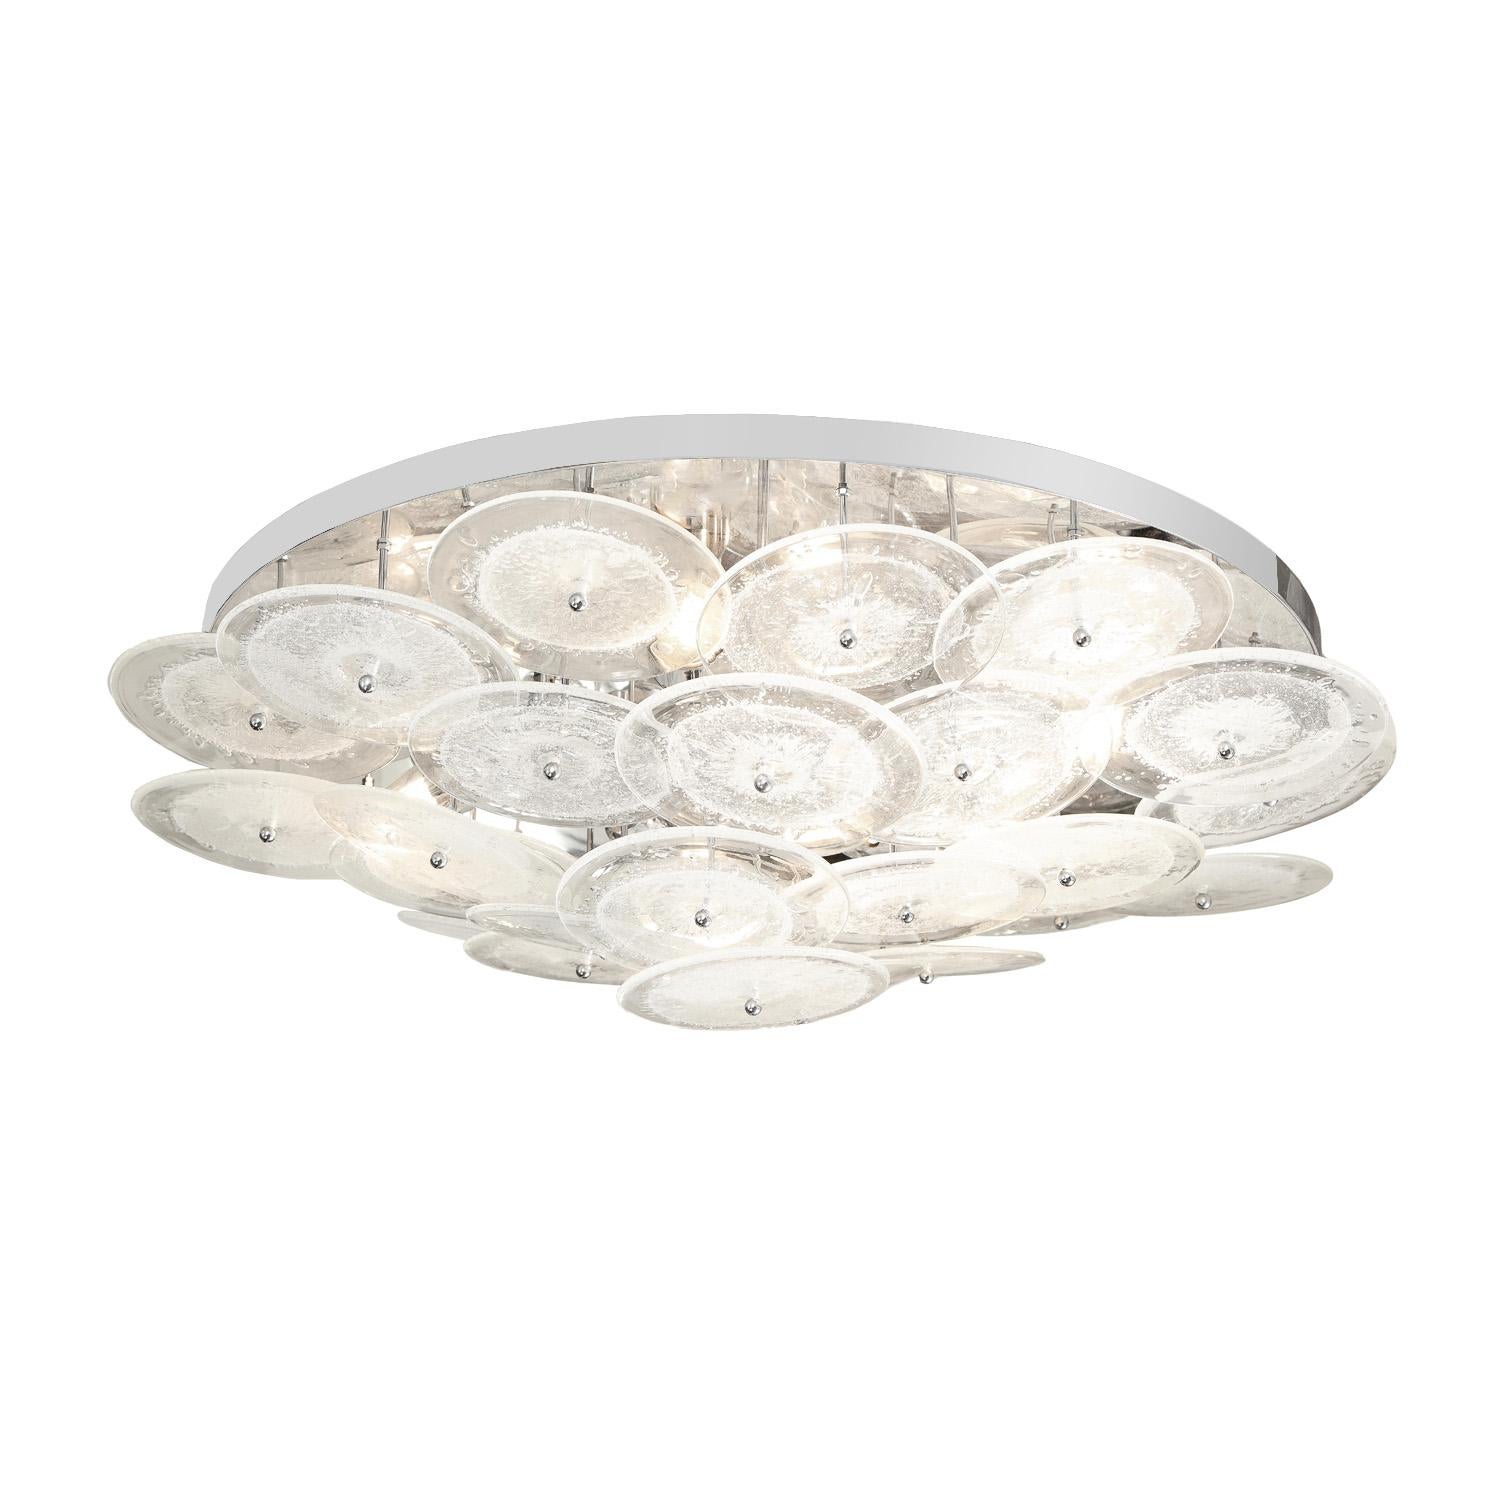 Hand-crafted Murano pulegoso clear glass disc flush mount fixture with polished nickel body. Italy.

Custom dimensions and glass colors are available. Lead time 6-8 weeks.